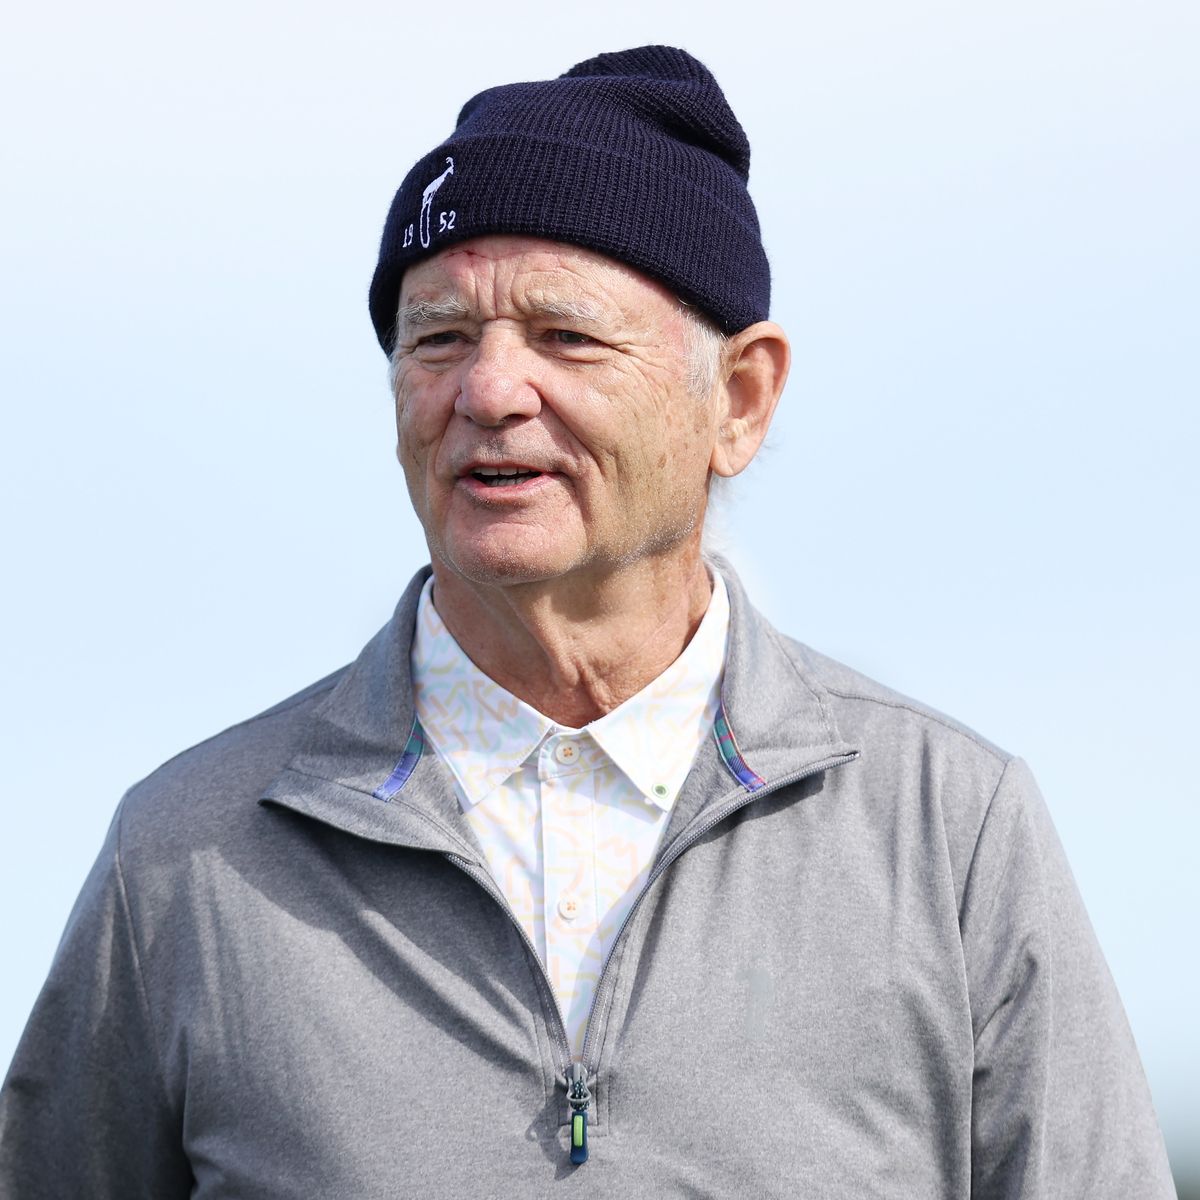 AT&T Pebble Beach Pro-Am - Round One PEBBLE BEACH, CALIFORNIA - FEBRUARY 03: Actor Bill Murray looks on during the first round of the AT&T Pebble Beach Pro-Am at Monterey Peninsula Country Club on February 03, 2022 in Pebble Beach, California. (Photo by Jed Jacobsohn/Getty Images)